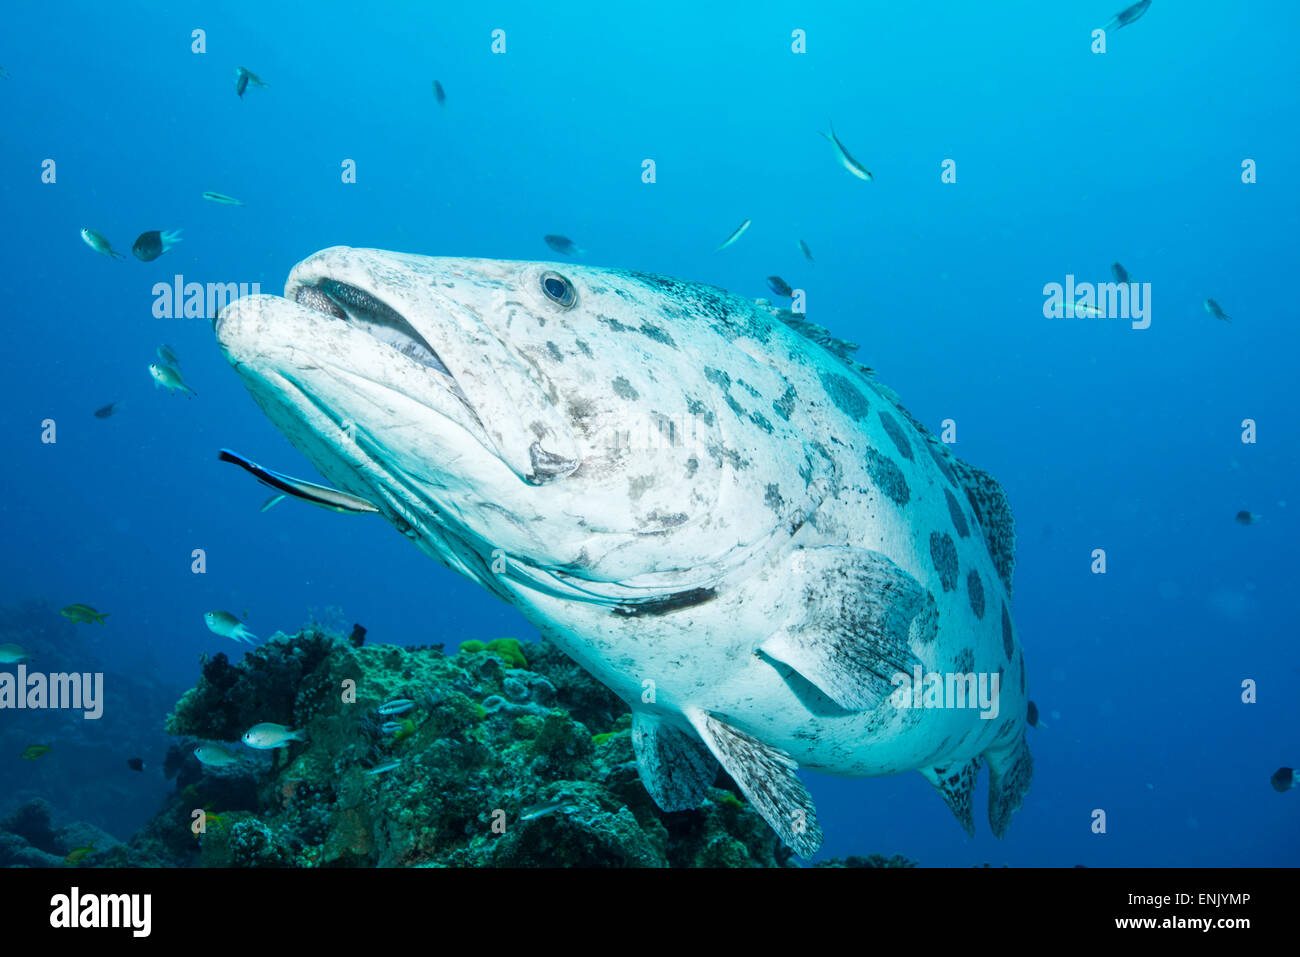 Potato cod (Epinephelus tukula) being cleaned by cleaner wrasse, Cod Hole, Great Barrier Reef, Queensland, Australia Stock Photo